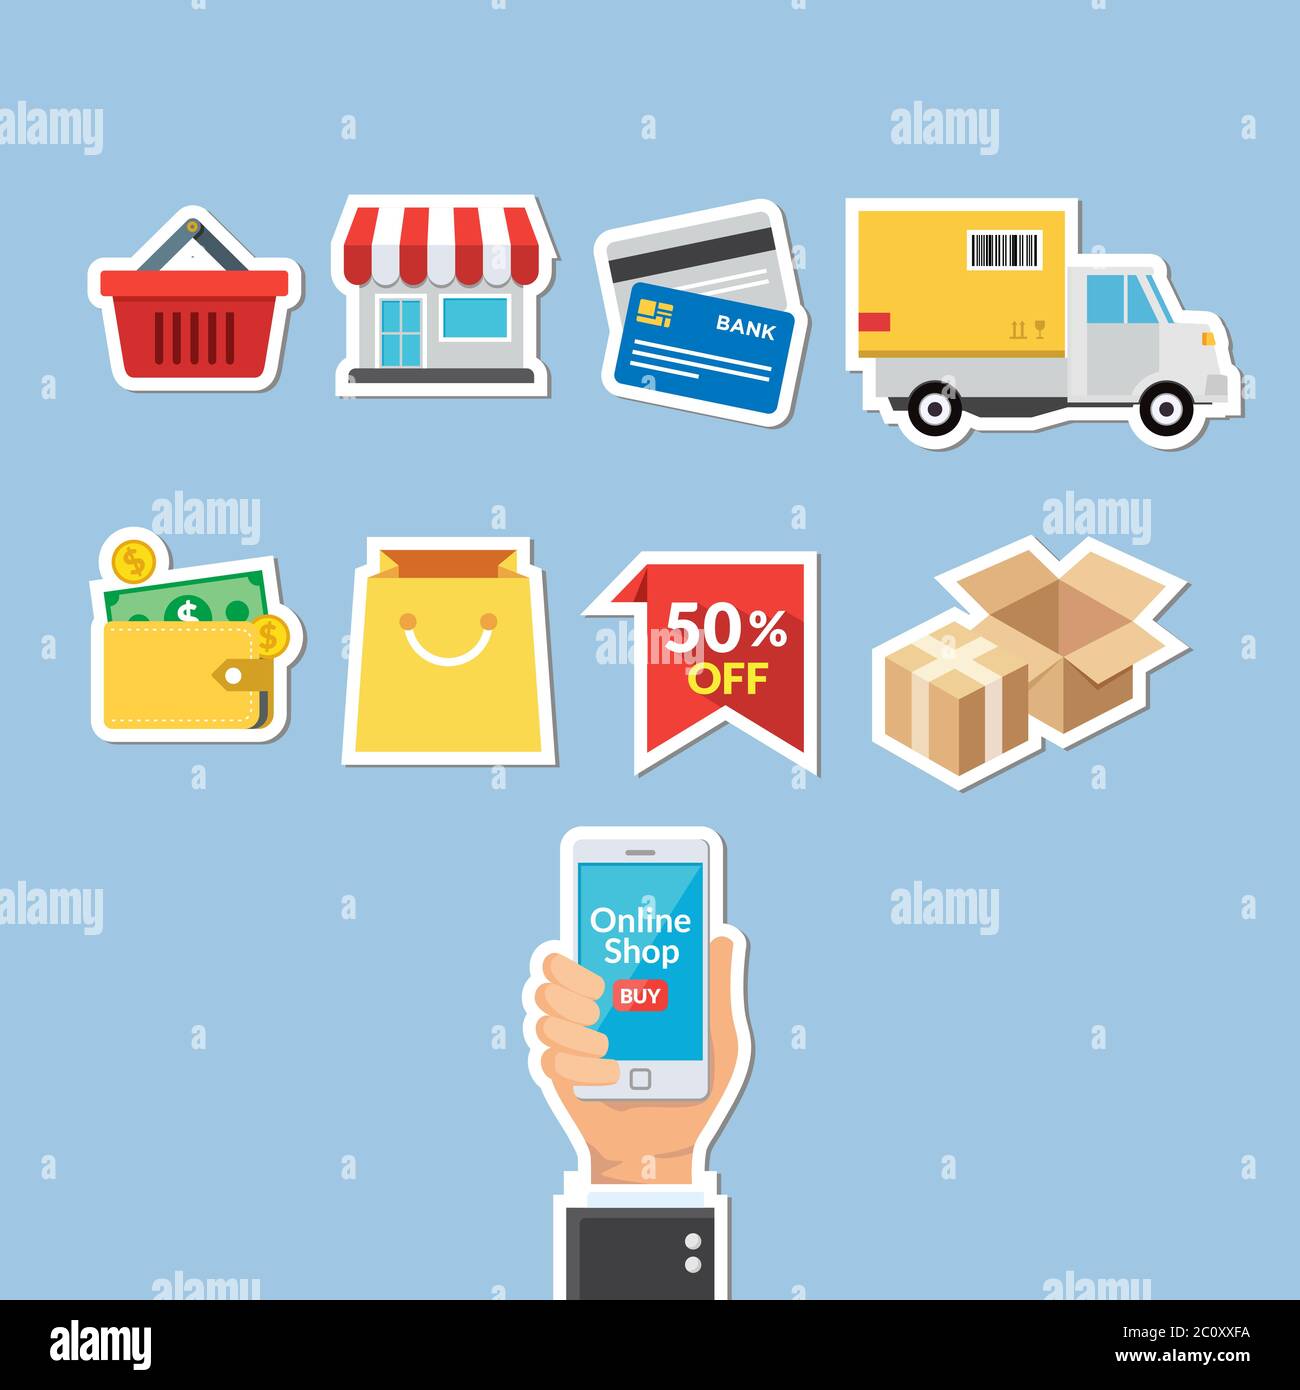 Sticker set elements of online shopping activities. illustration of internet for online shopping Vector Image & Art - Alamy